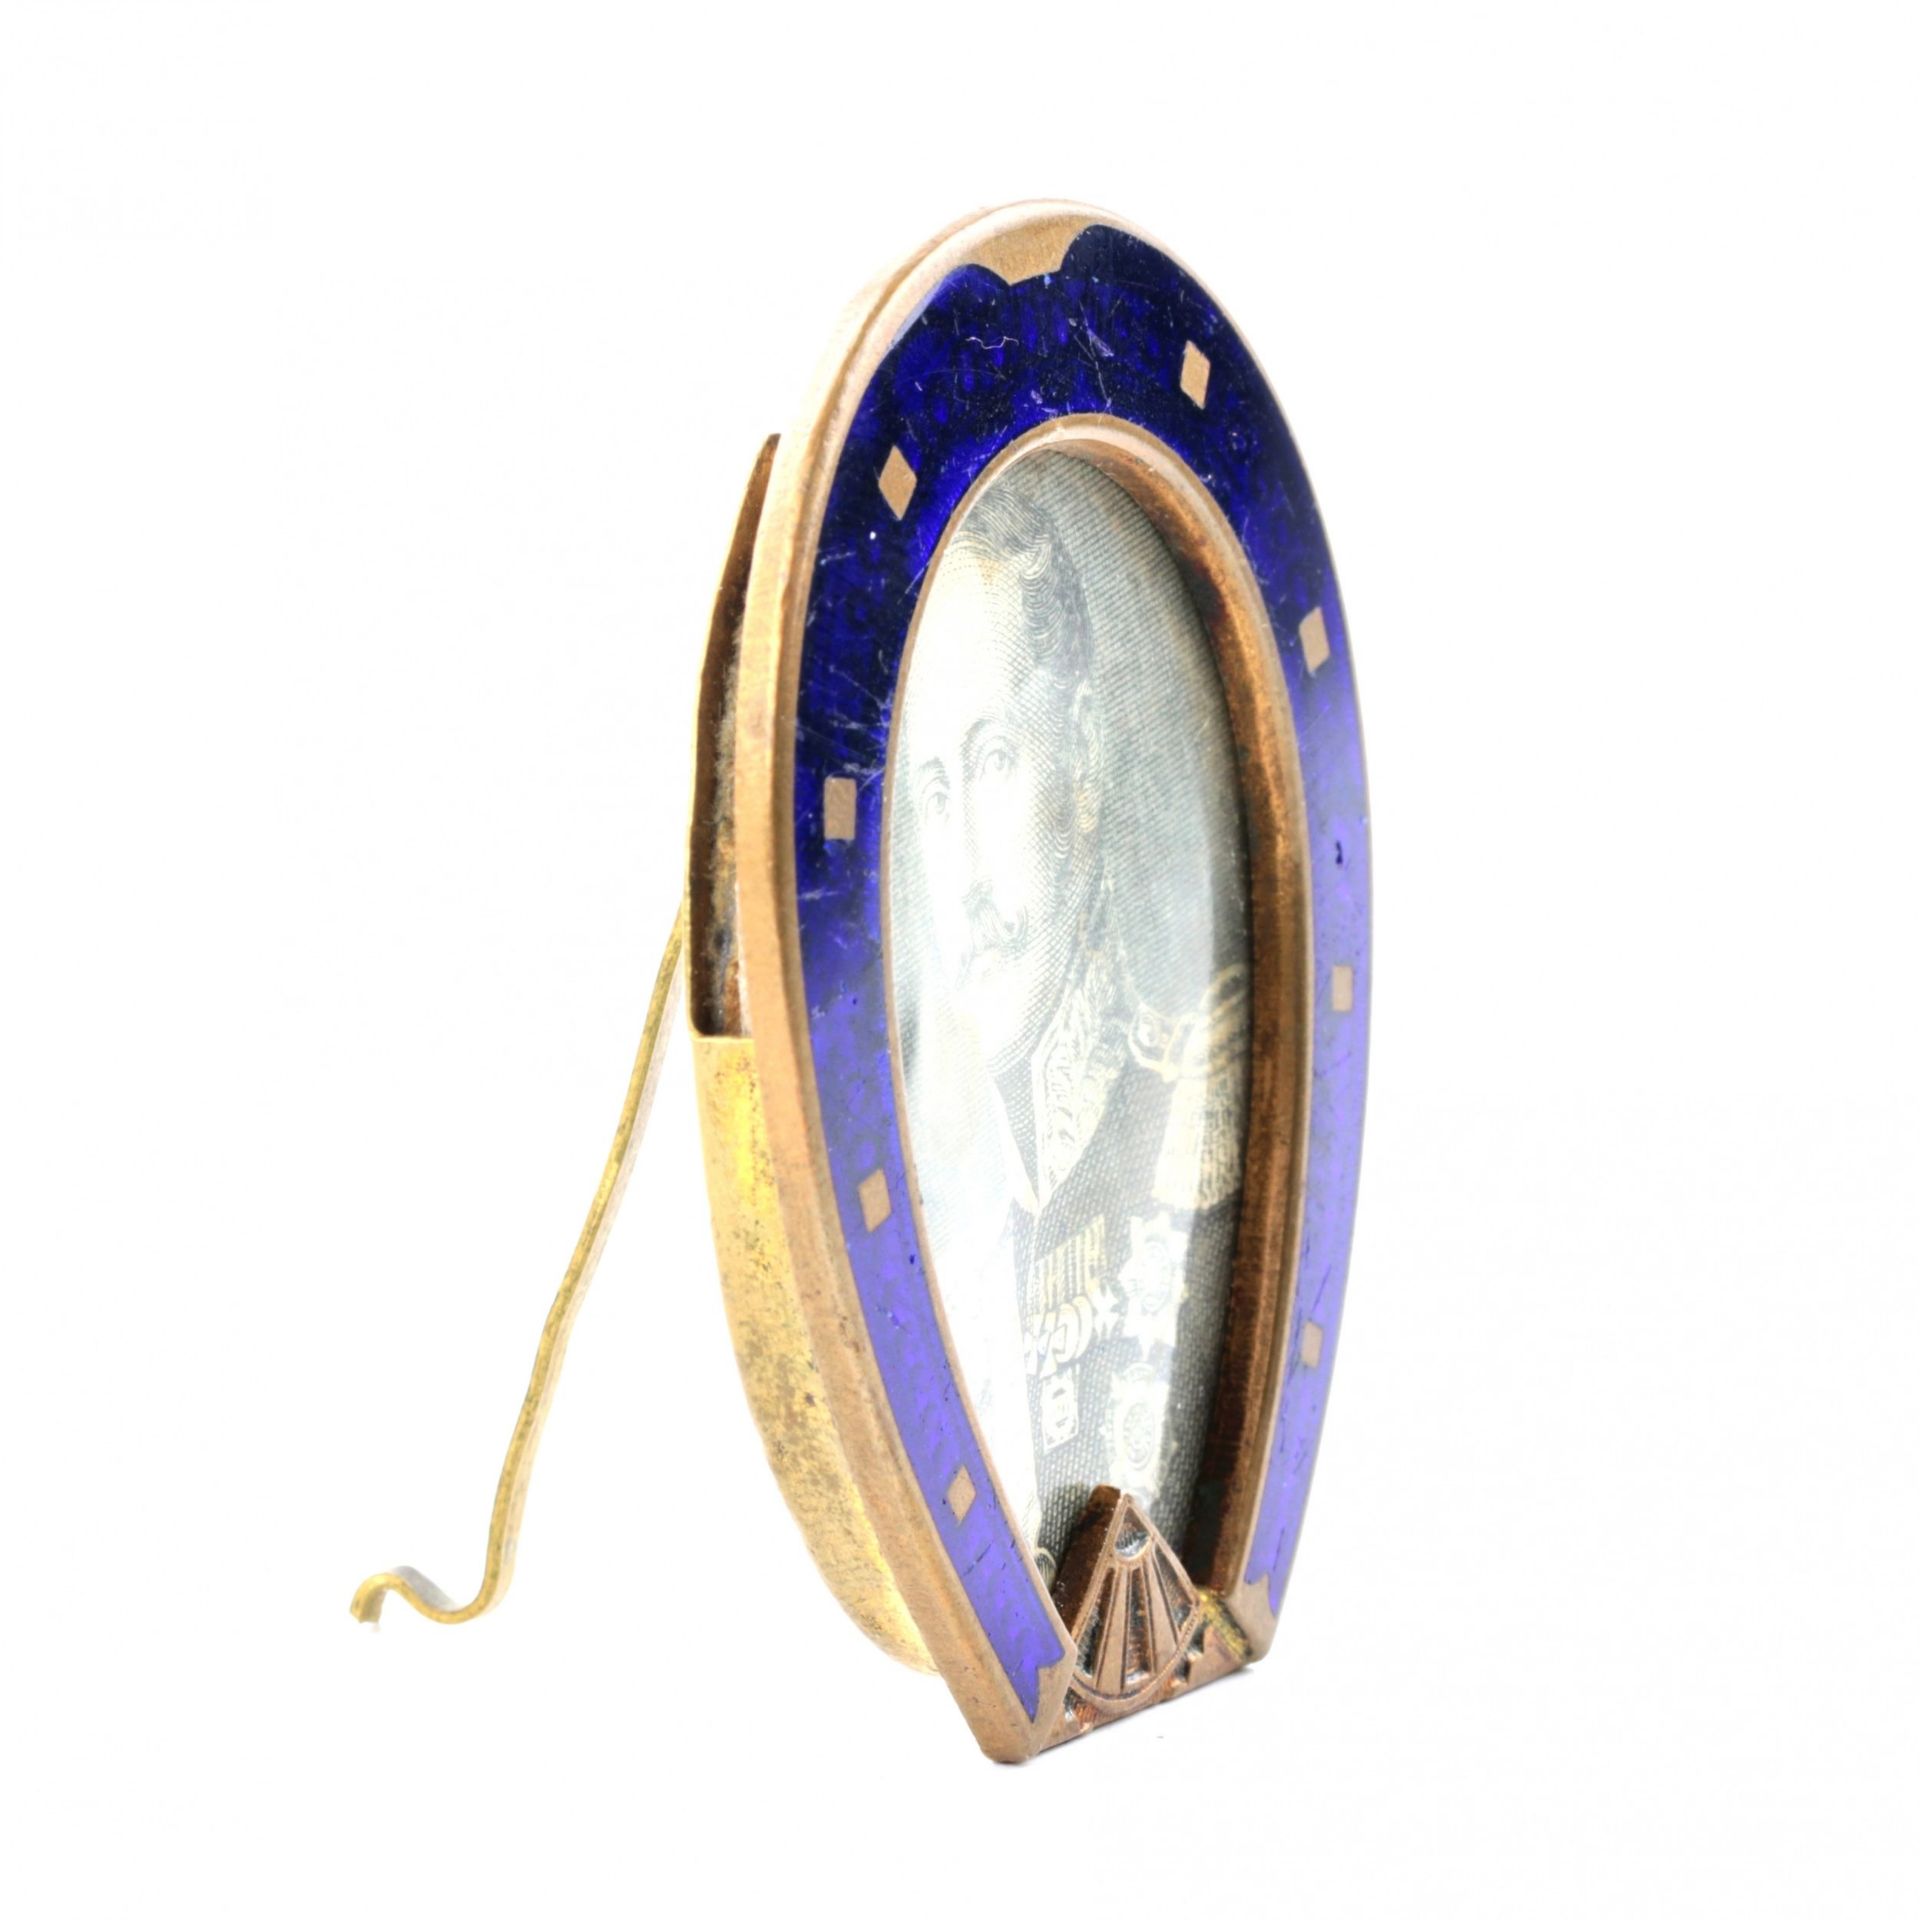 Photo frame in the shape of a horseshoe, with blue enamel from the late 19th century. - Image 2 of 4